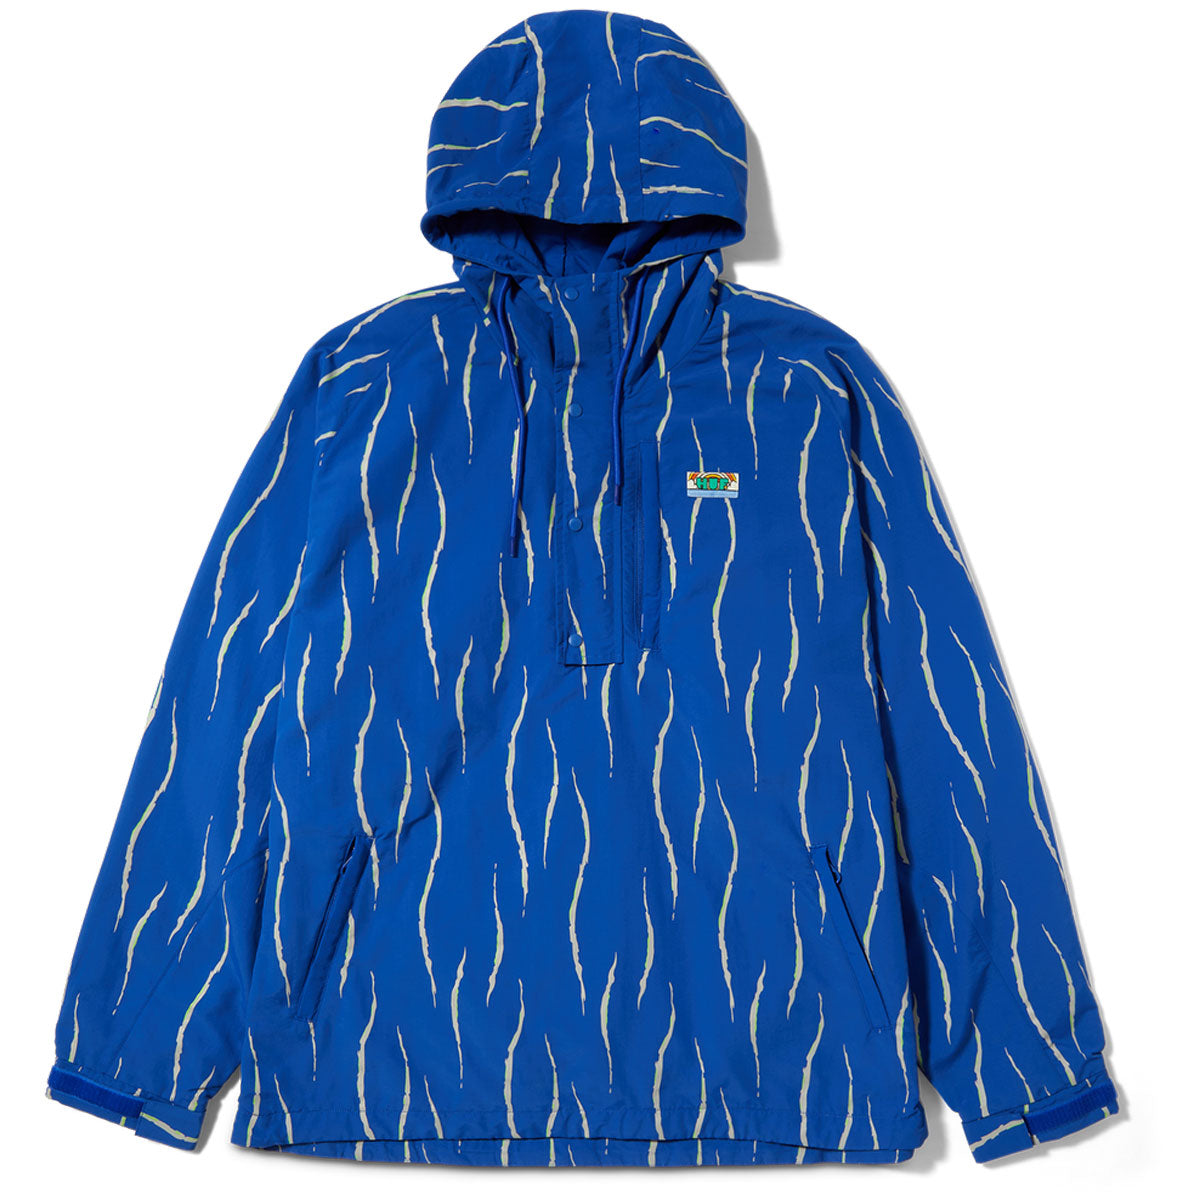 HUF New Day Striped Packable Anorak Jacket - Blue image 2